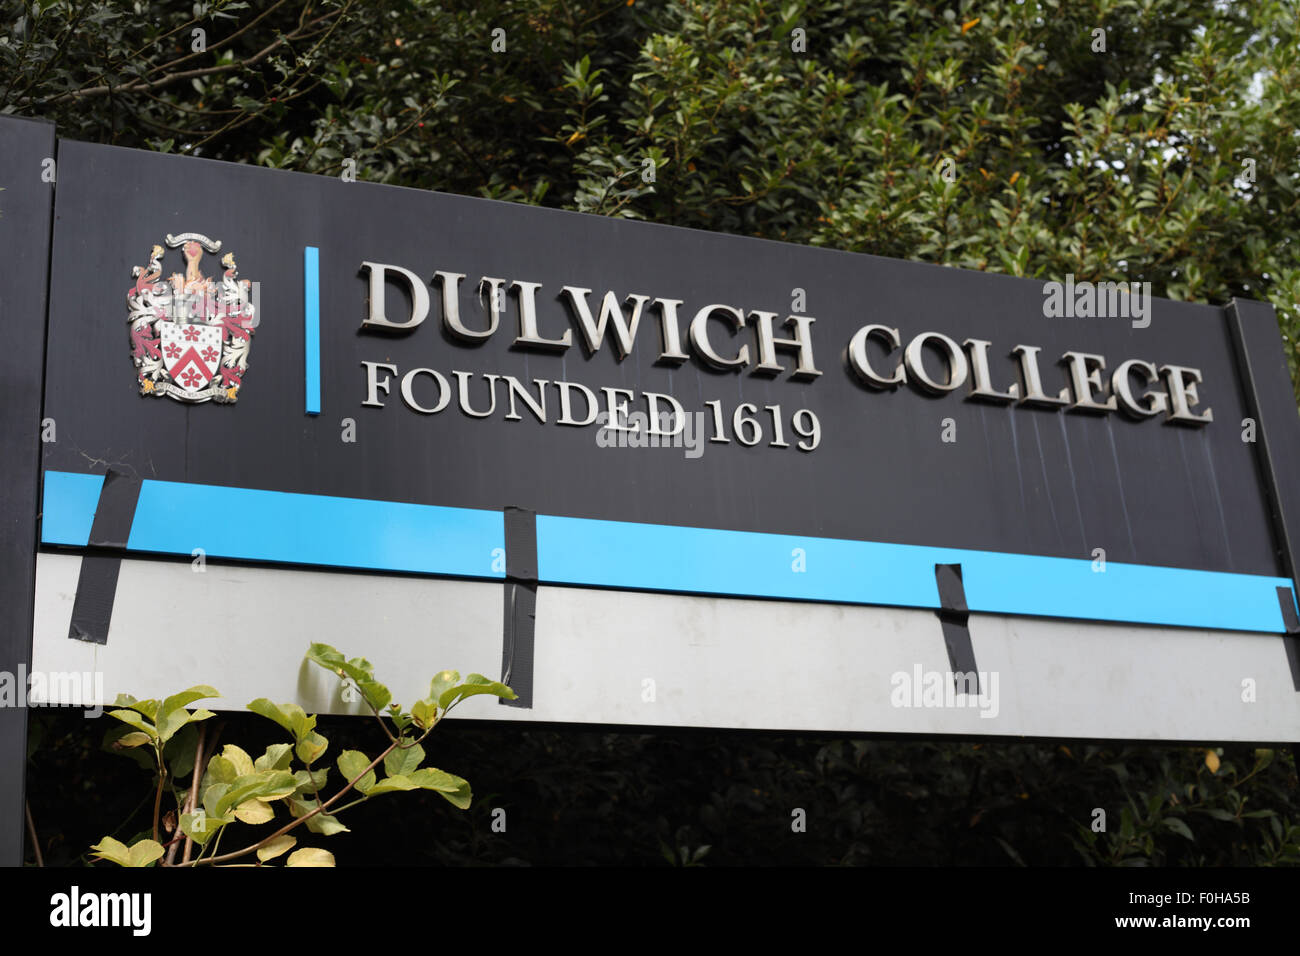 Sign to Dulwich College founded in 1619 by Eward Alleyn, an Elizabethan actor,  Dulwich, London SE21 Stock Photo